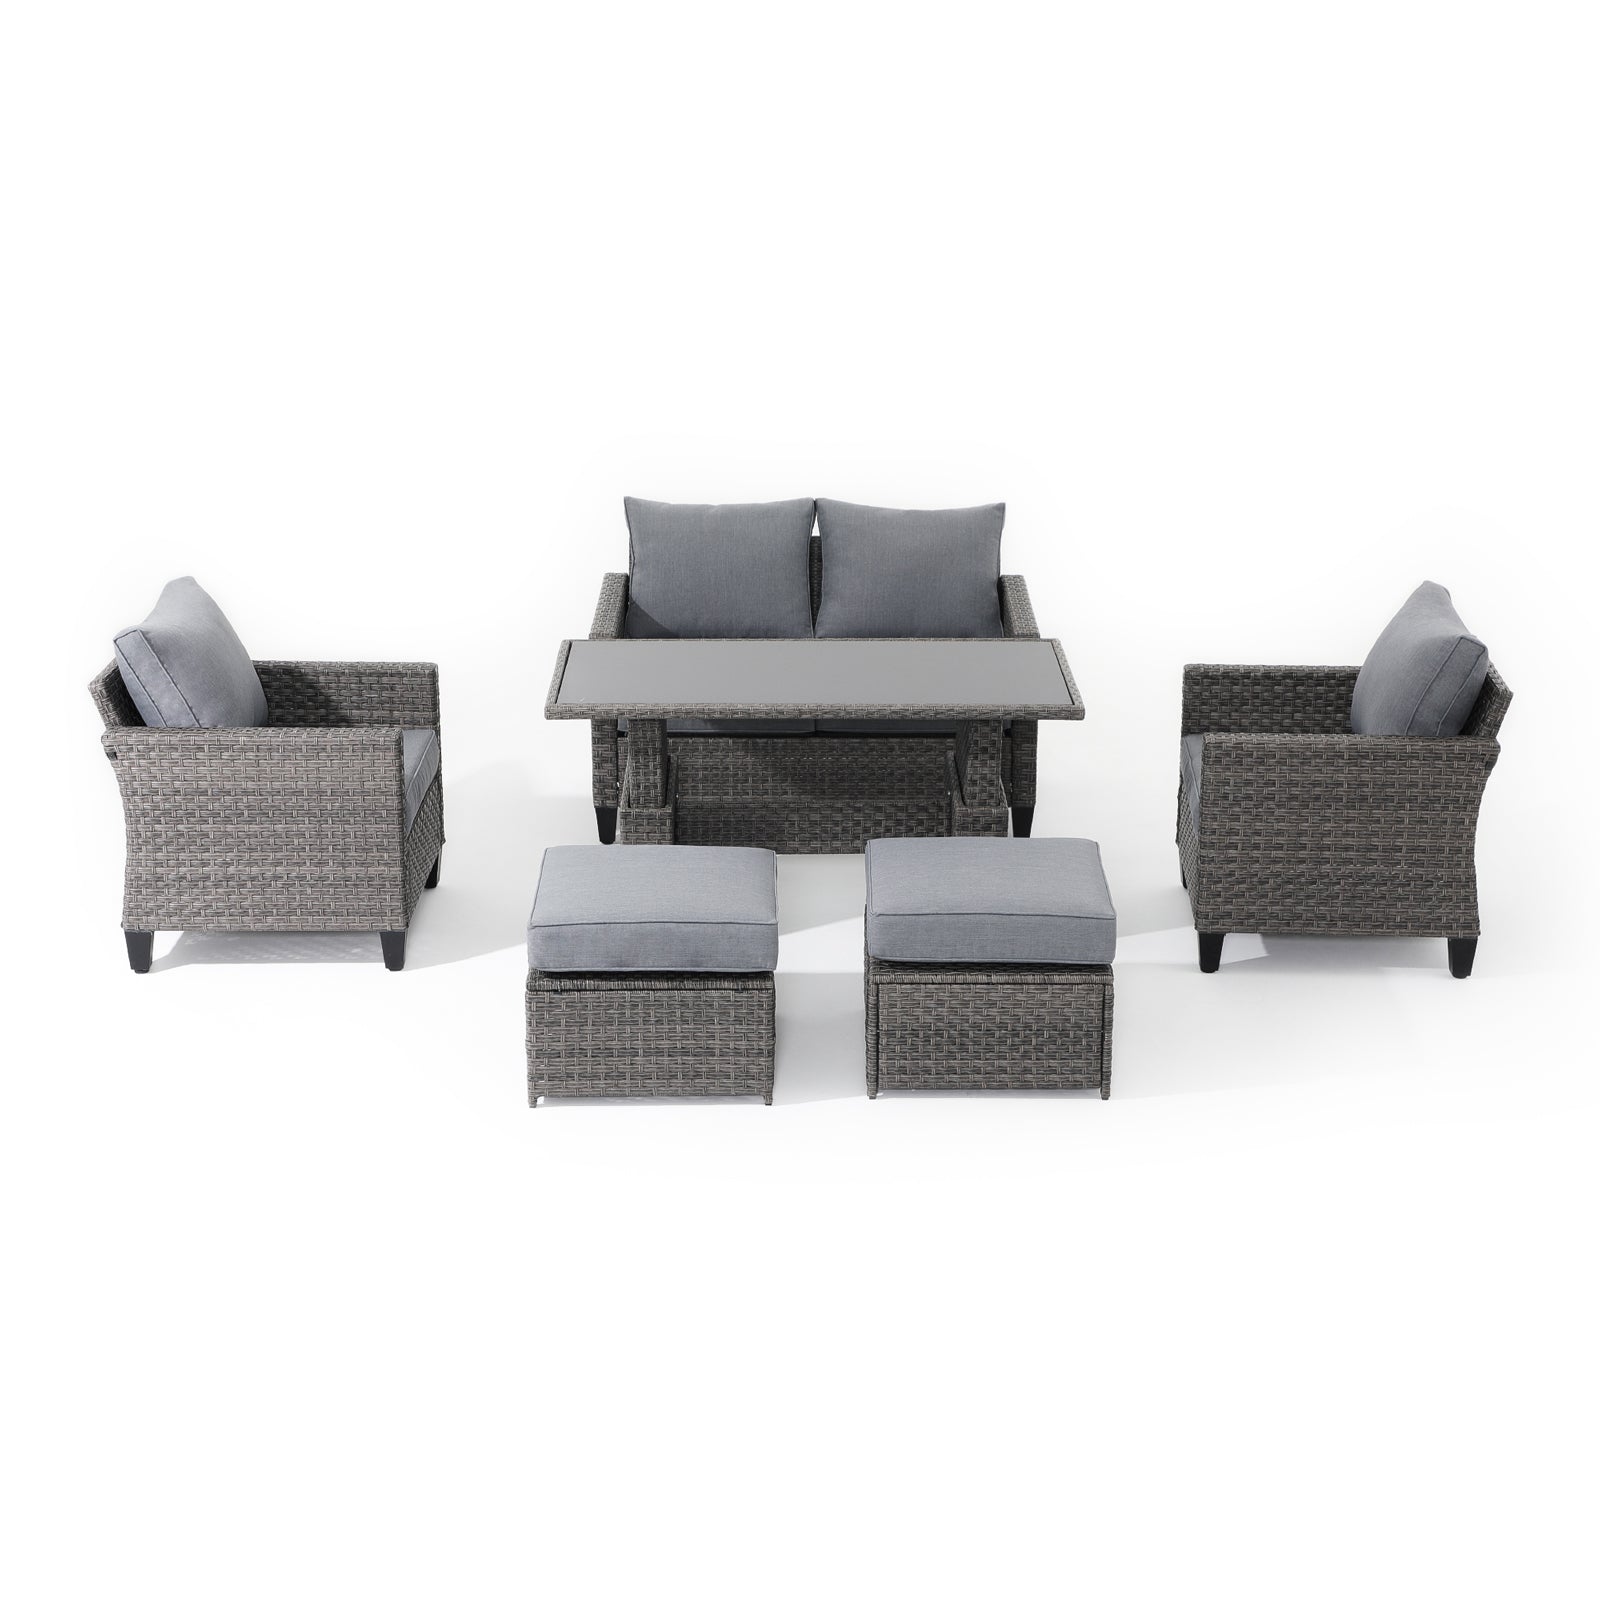 Ayia 6 piece outdoor seating set,wicker design, grey cushions-Jardina furniture #color_Grey#piece_6-pc. with Ottomans